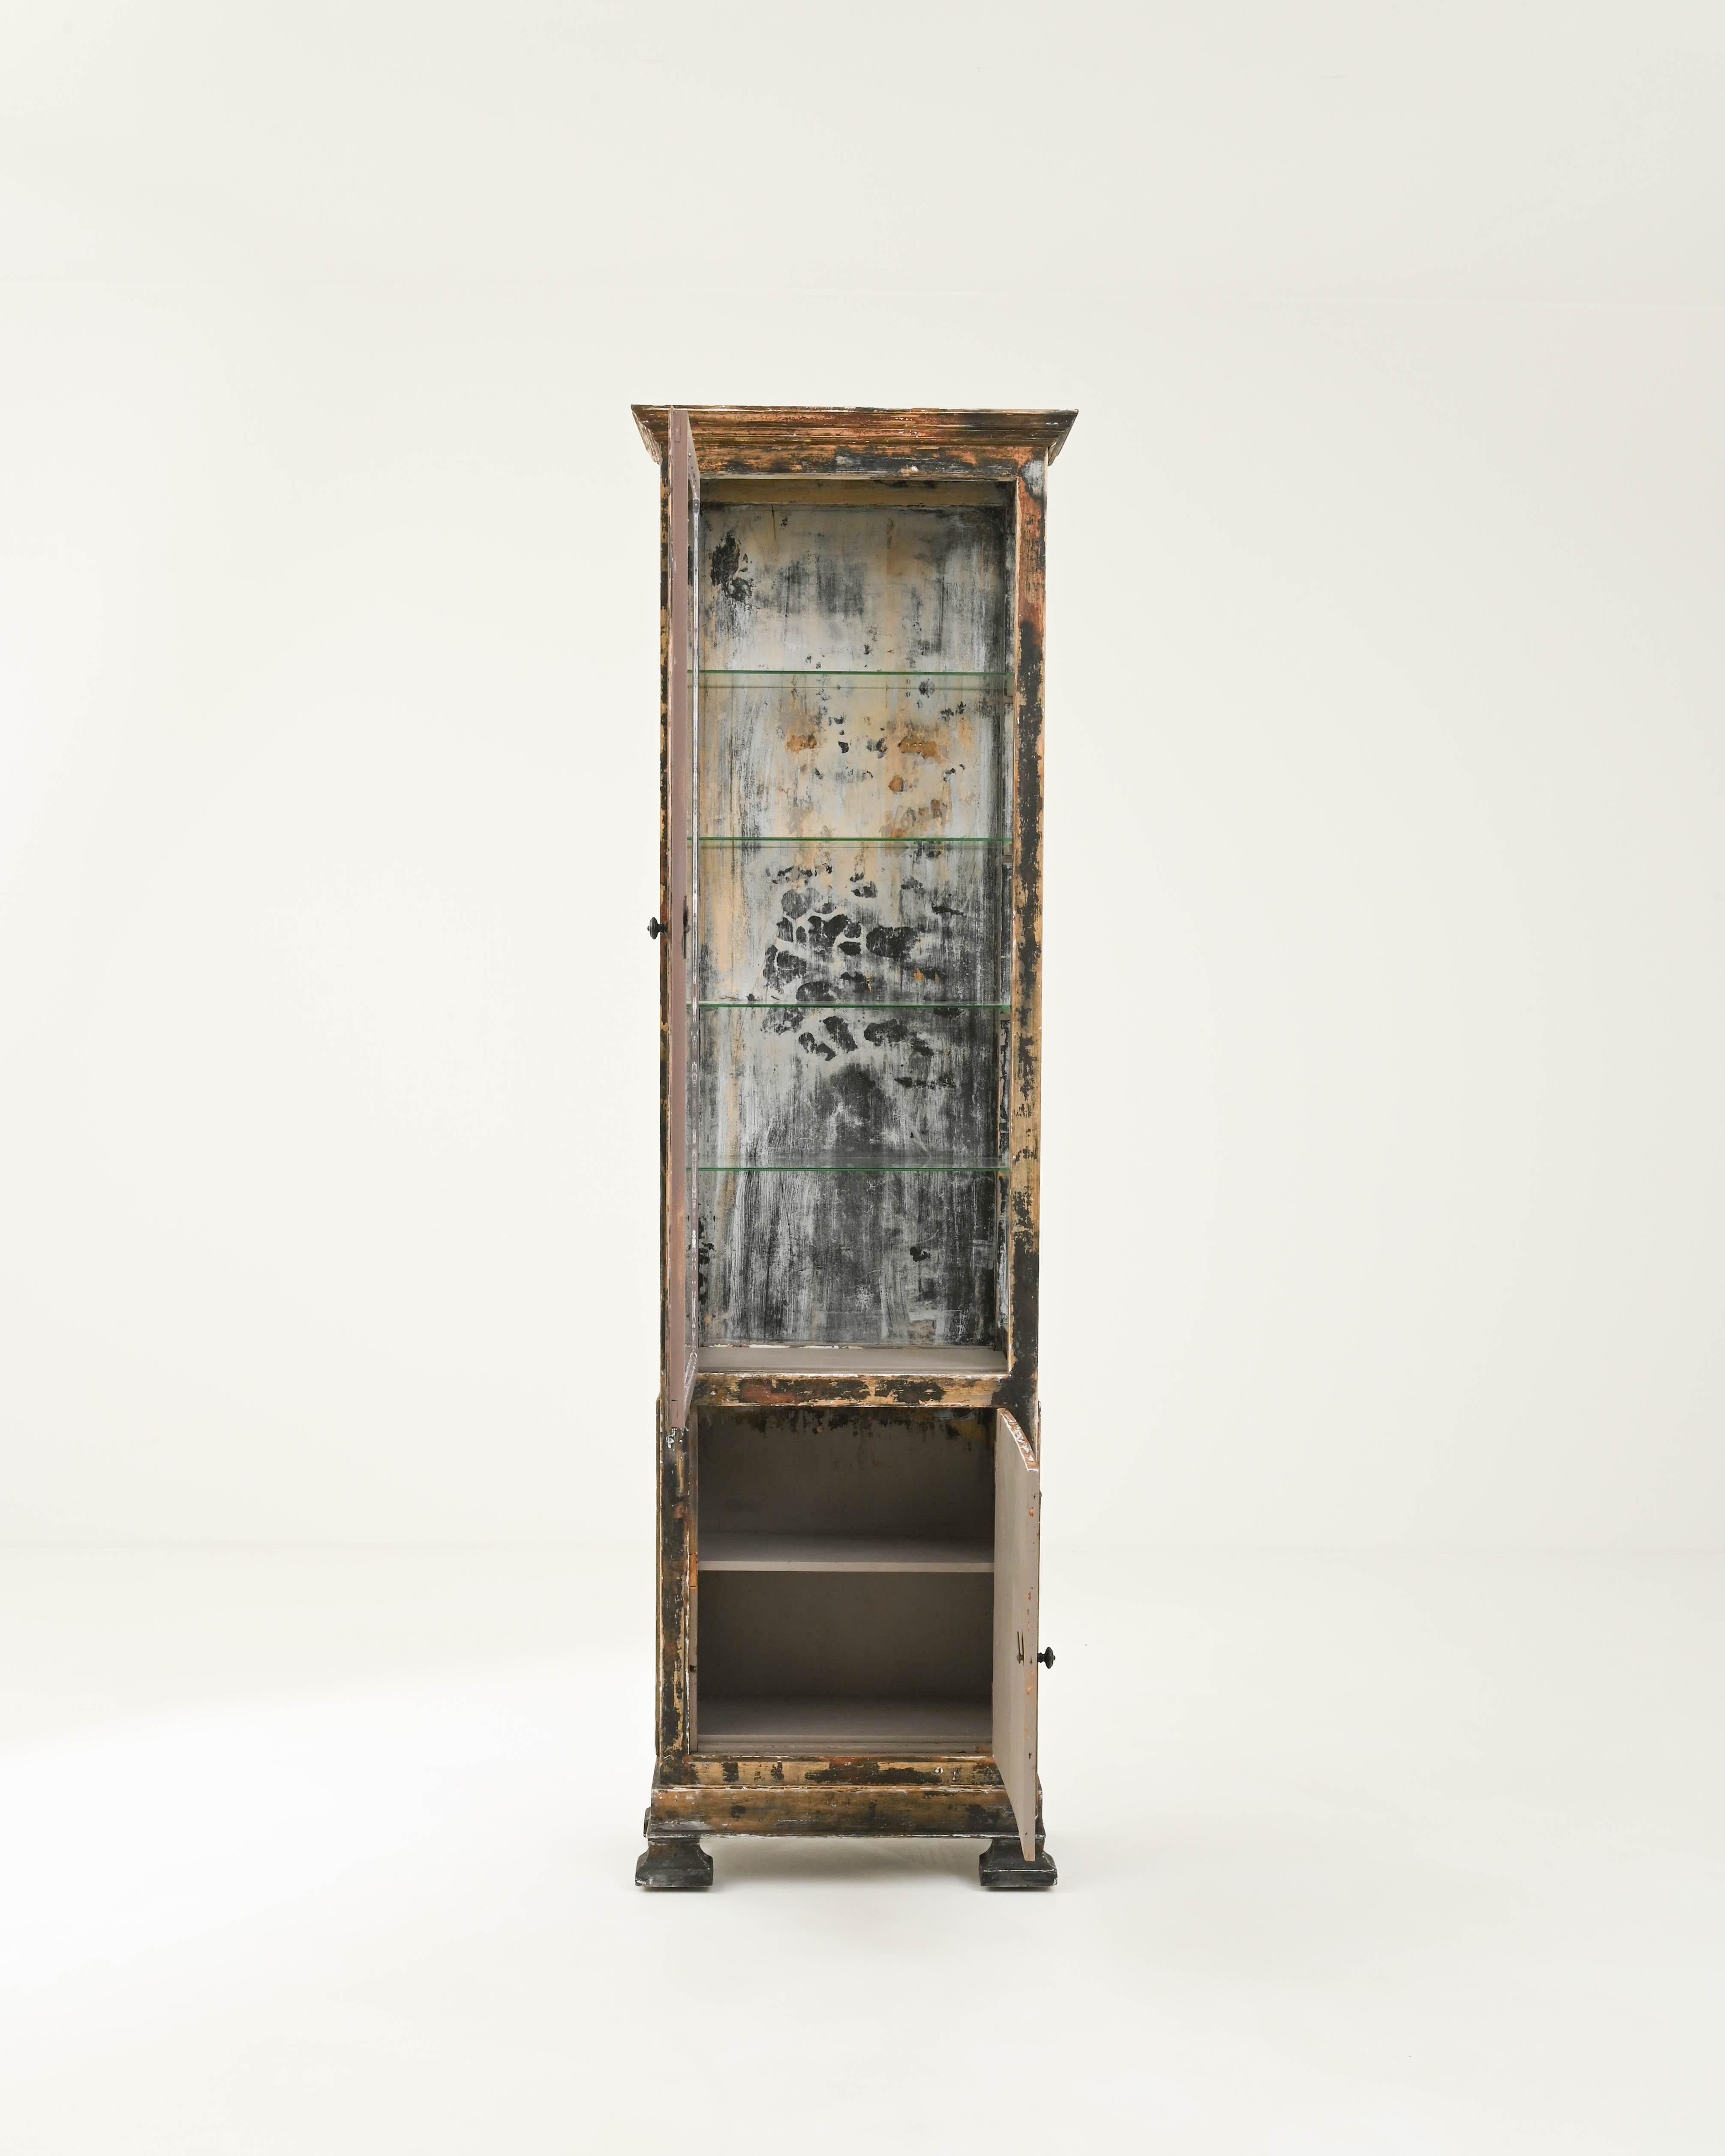 The tall, slender silhouette and dramatic patina of this wooden vitrine make it a covetable antique find. Built in France in the 1800s, windows on three sides of the narrow cabinet give a view onto four glass shelves, while a paneled cupboard below